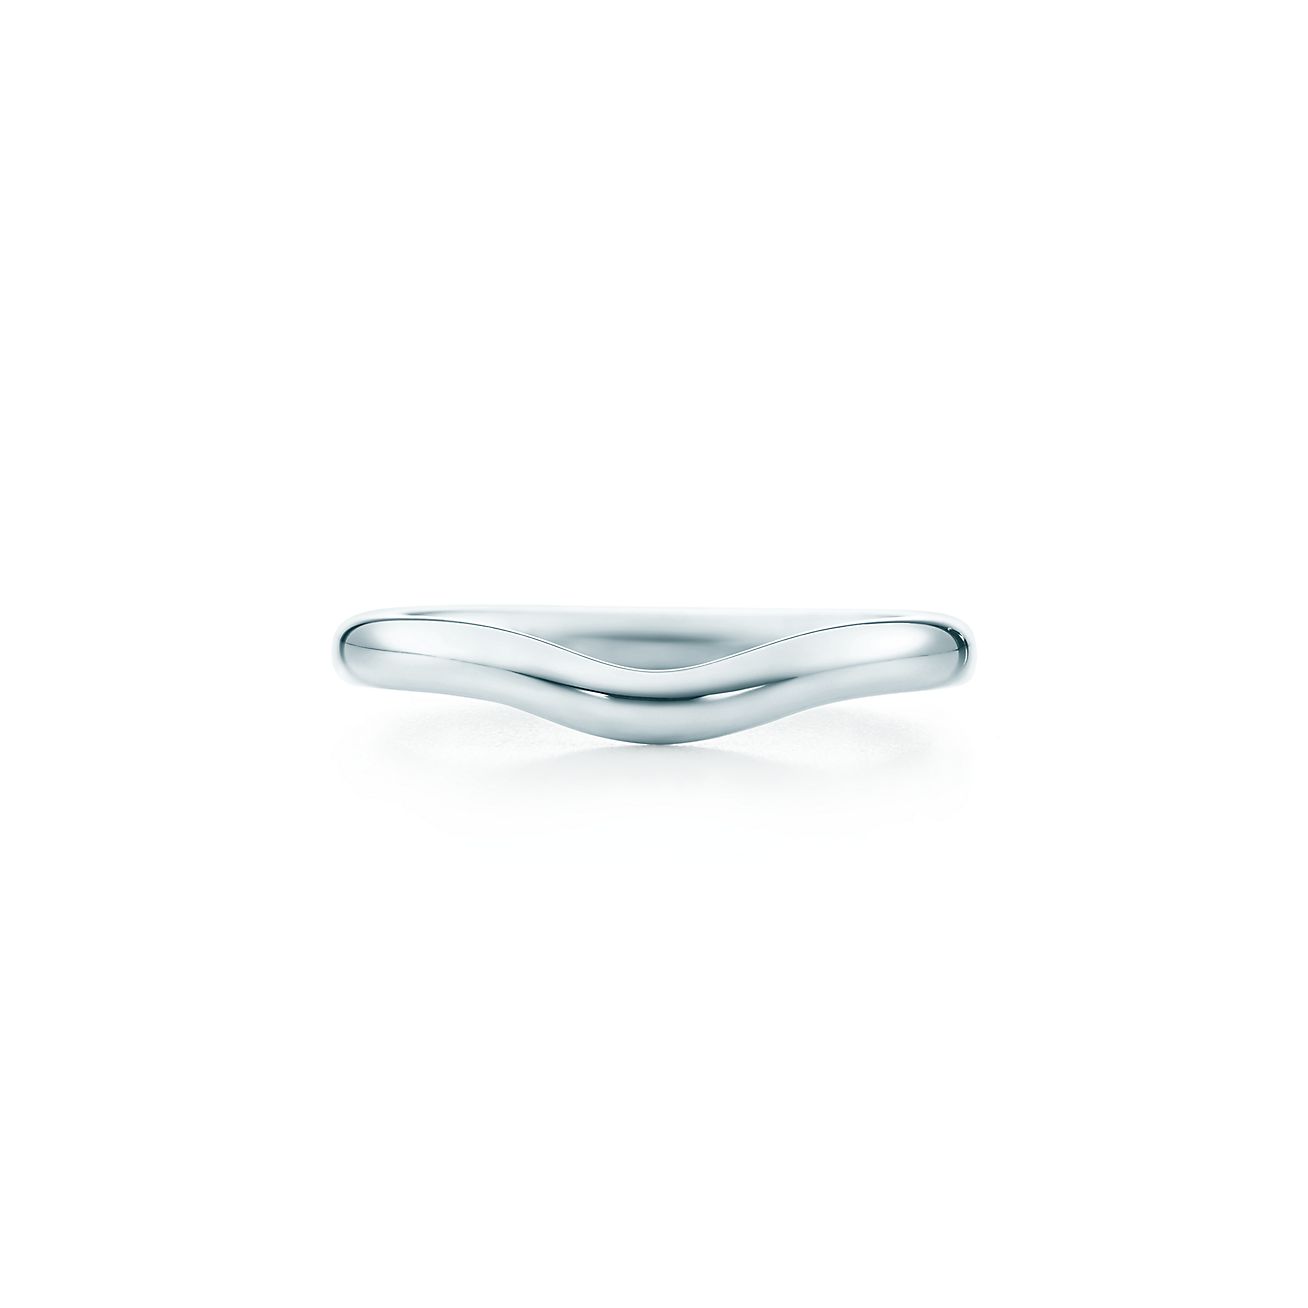 Elsa Peretti® curved band ring in 